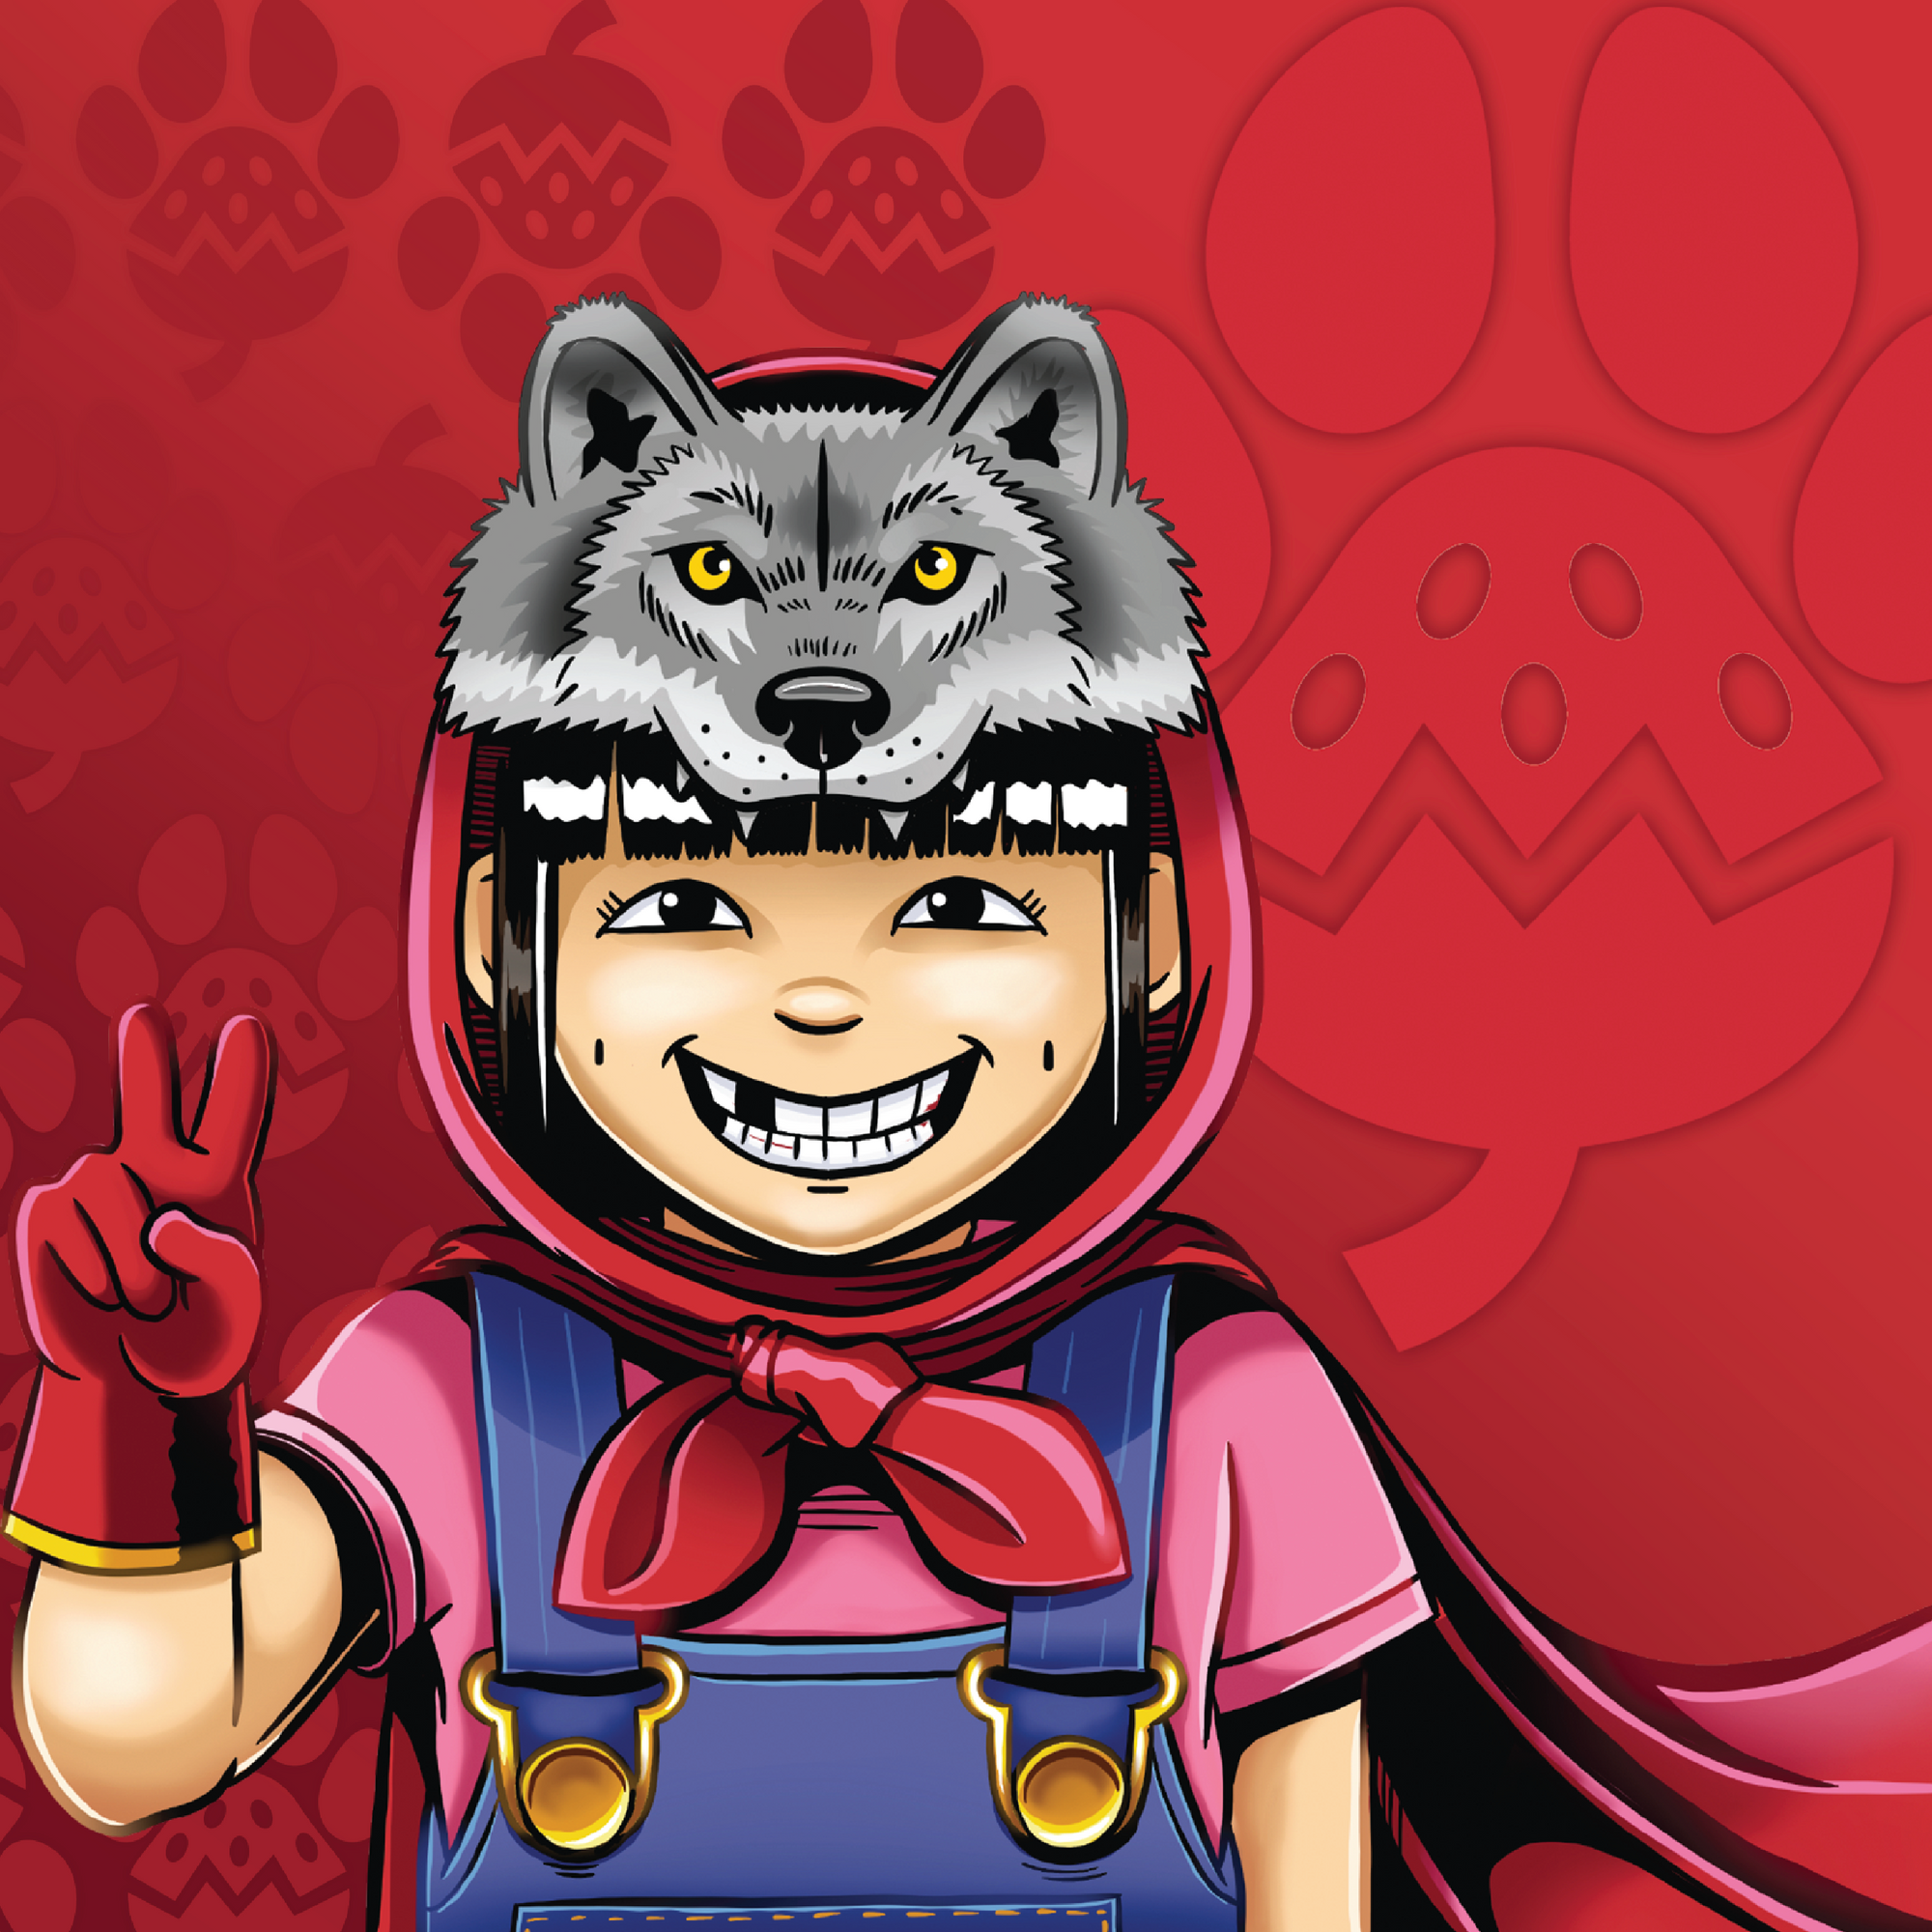 Comic style drawing of folk lore character, Little Red Riding Hood, action figure with wolf hat and candy apple red cape.